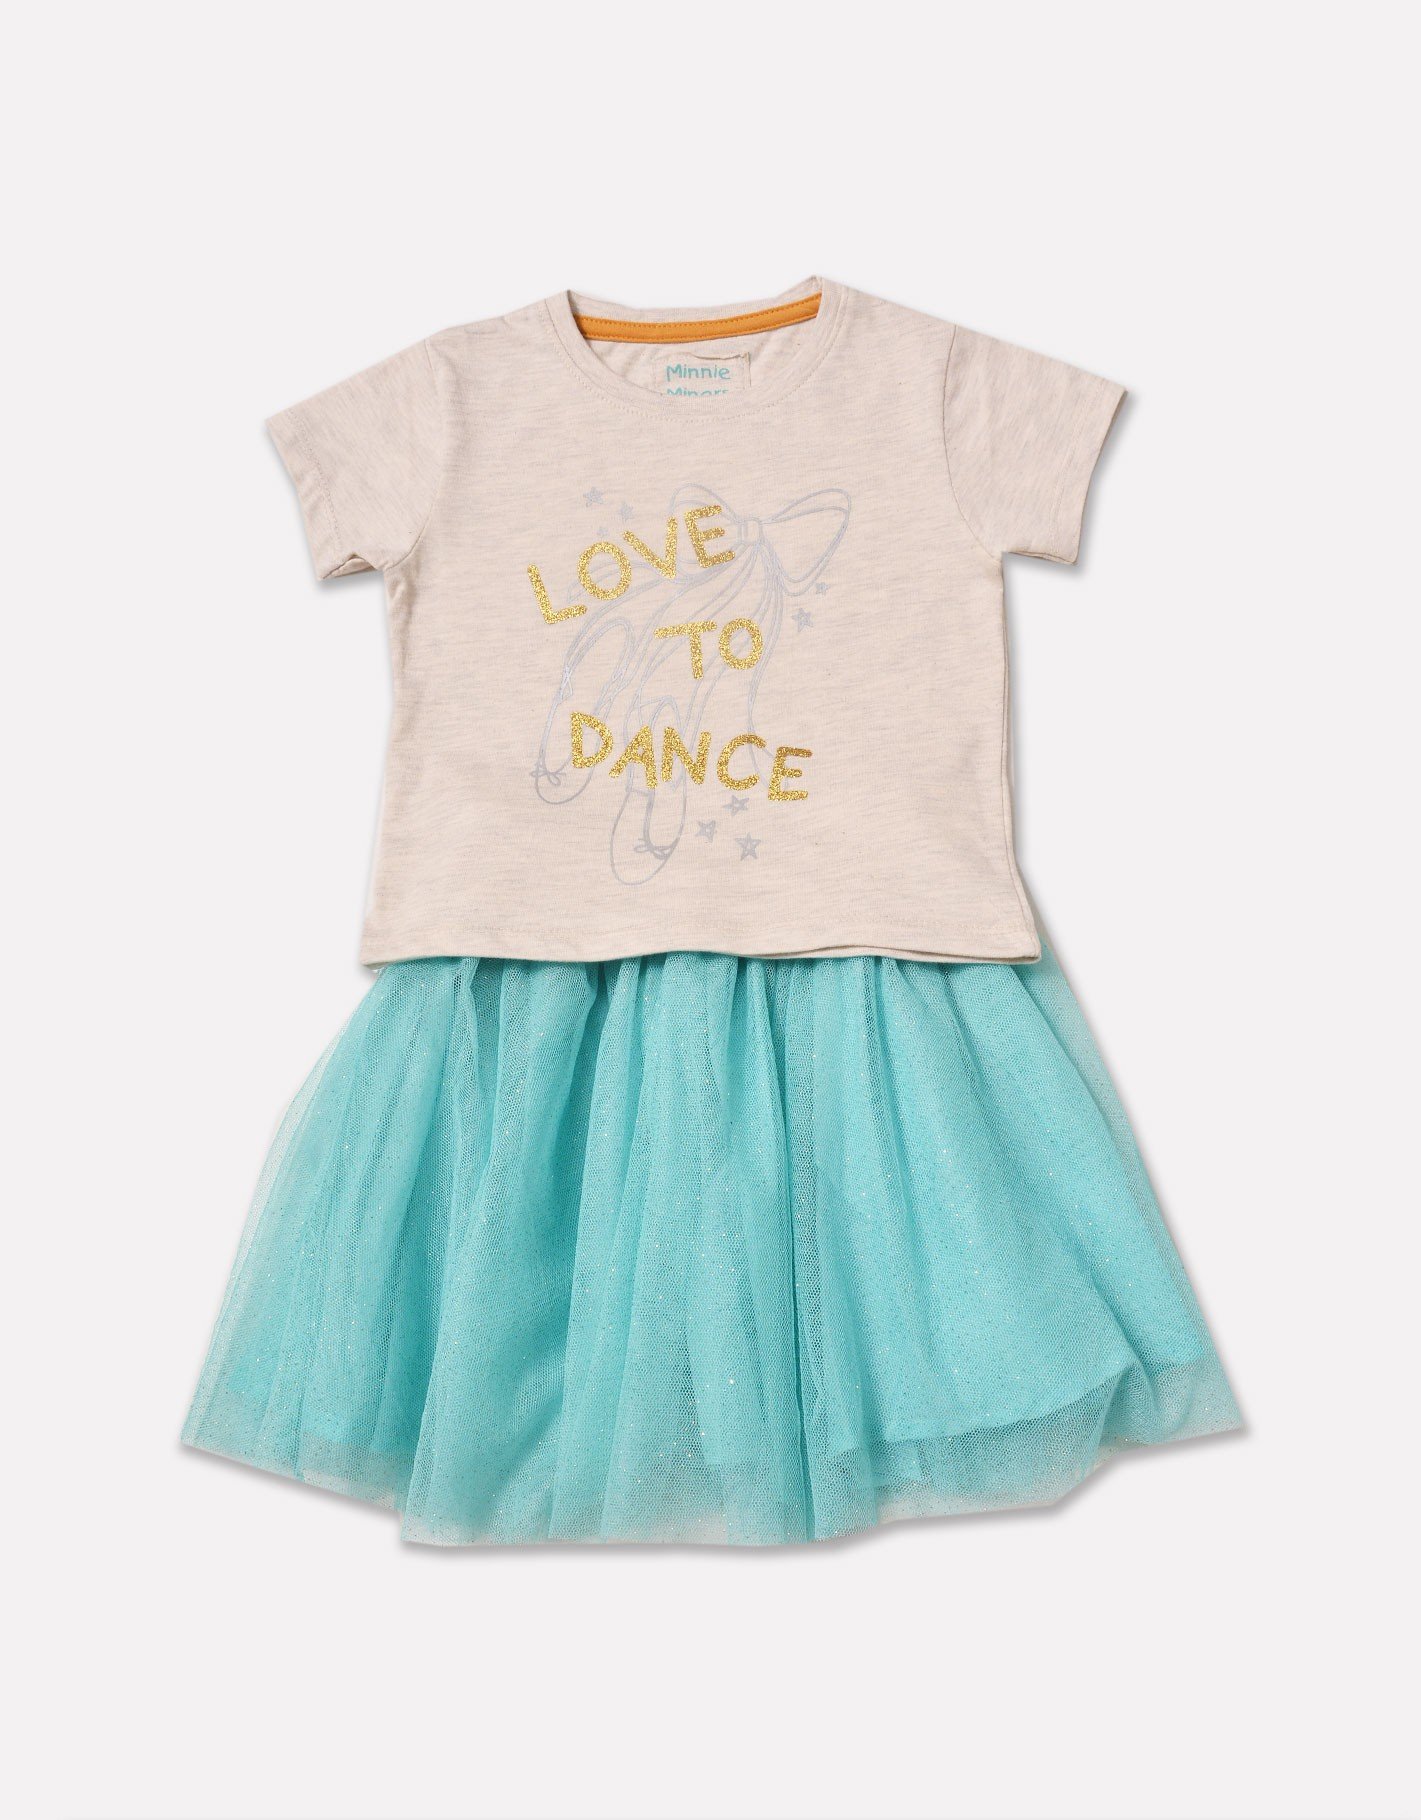 Minnie-minors-sale-baby-girl-dresses-online-shopping